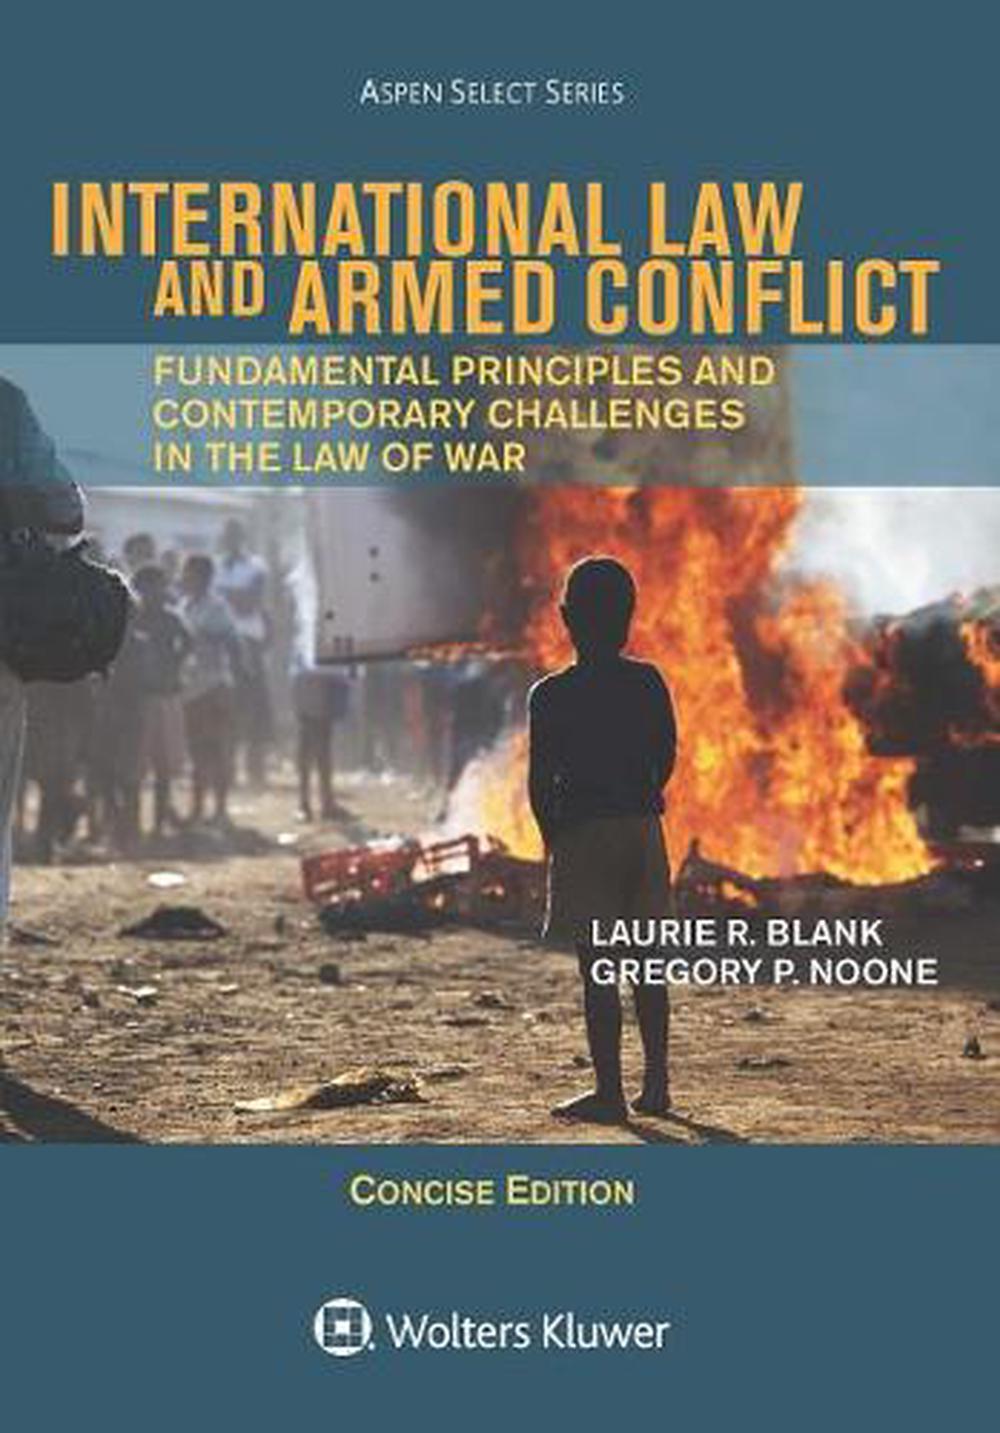 international humanitarian law and law of armed conflict